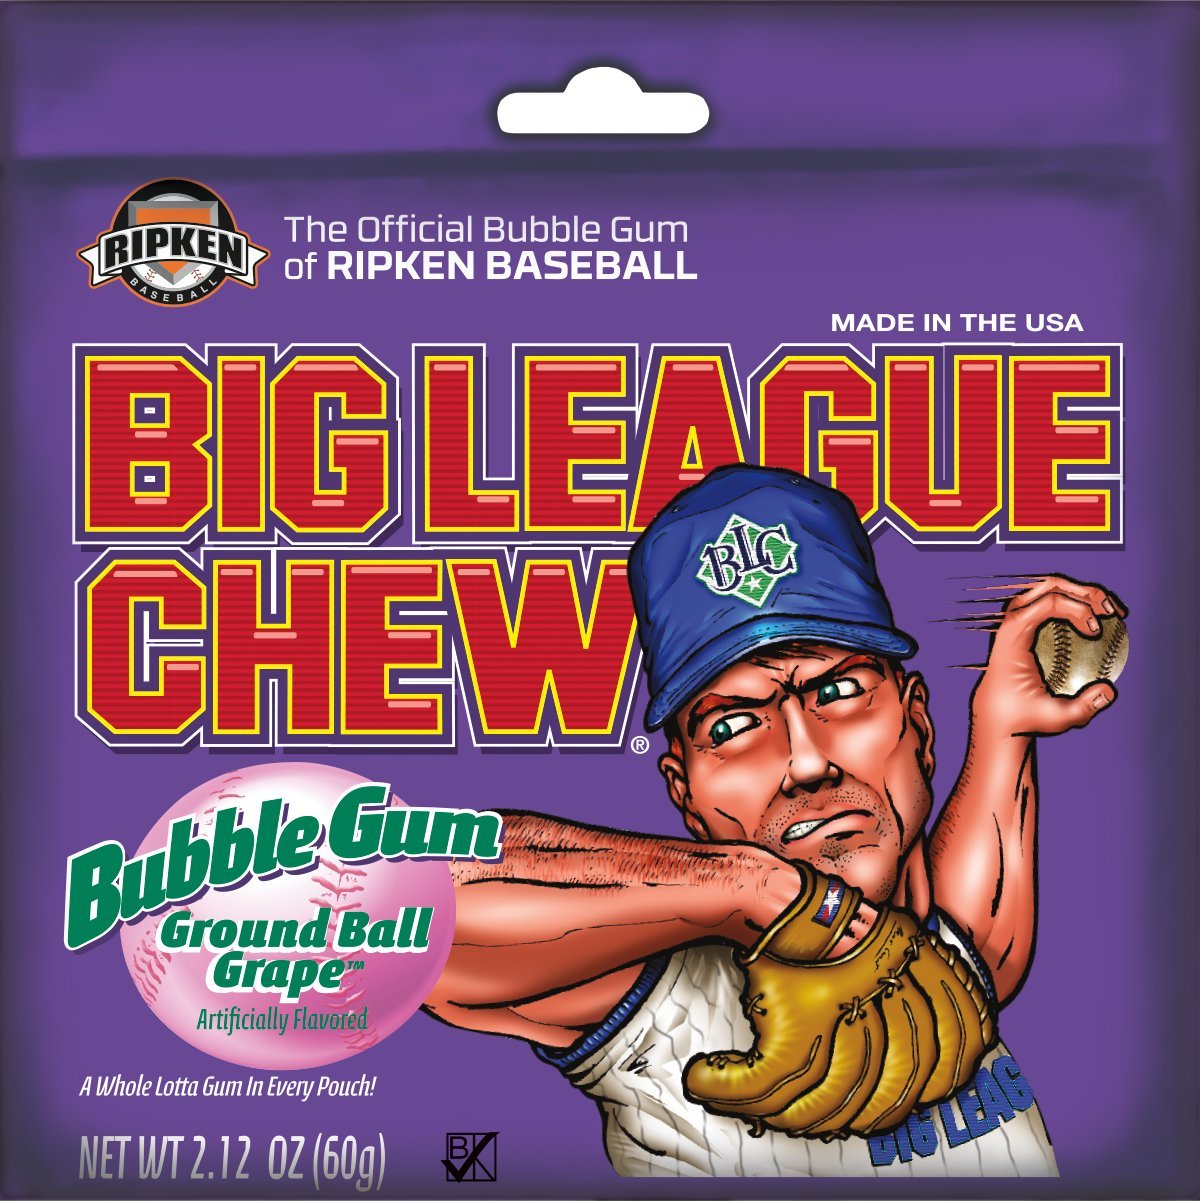 baseball players and coaches chewing gum